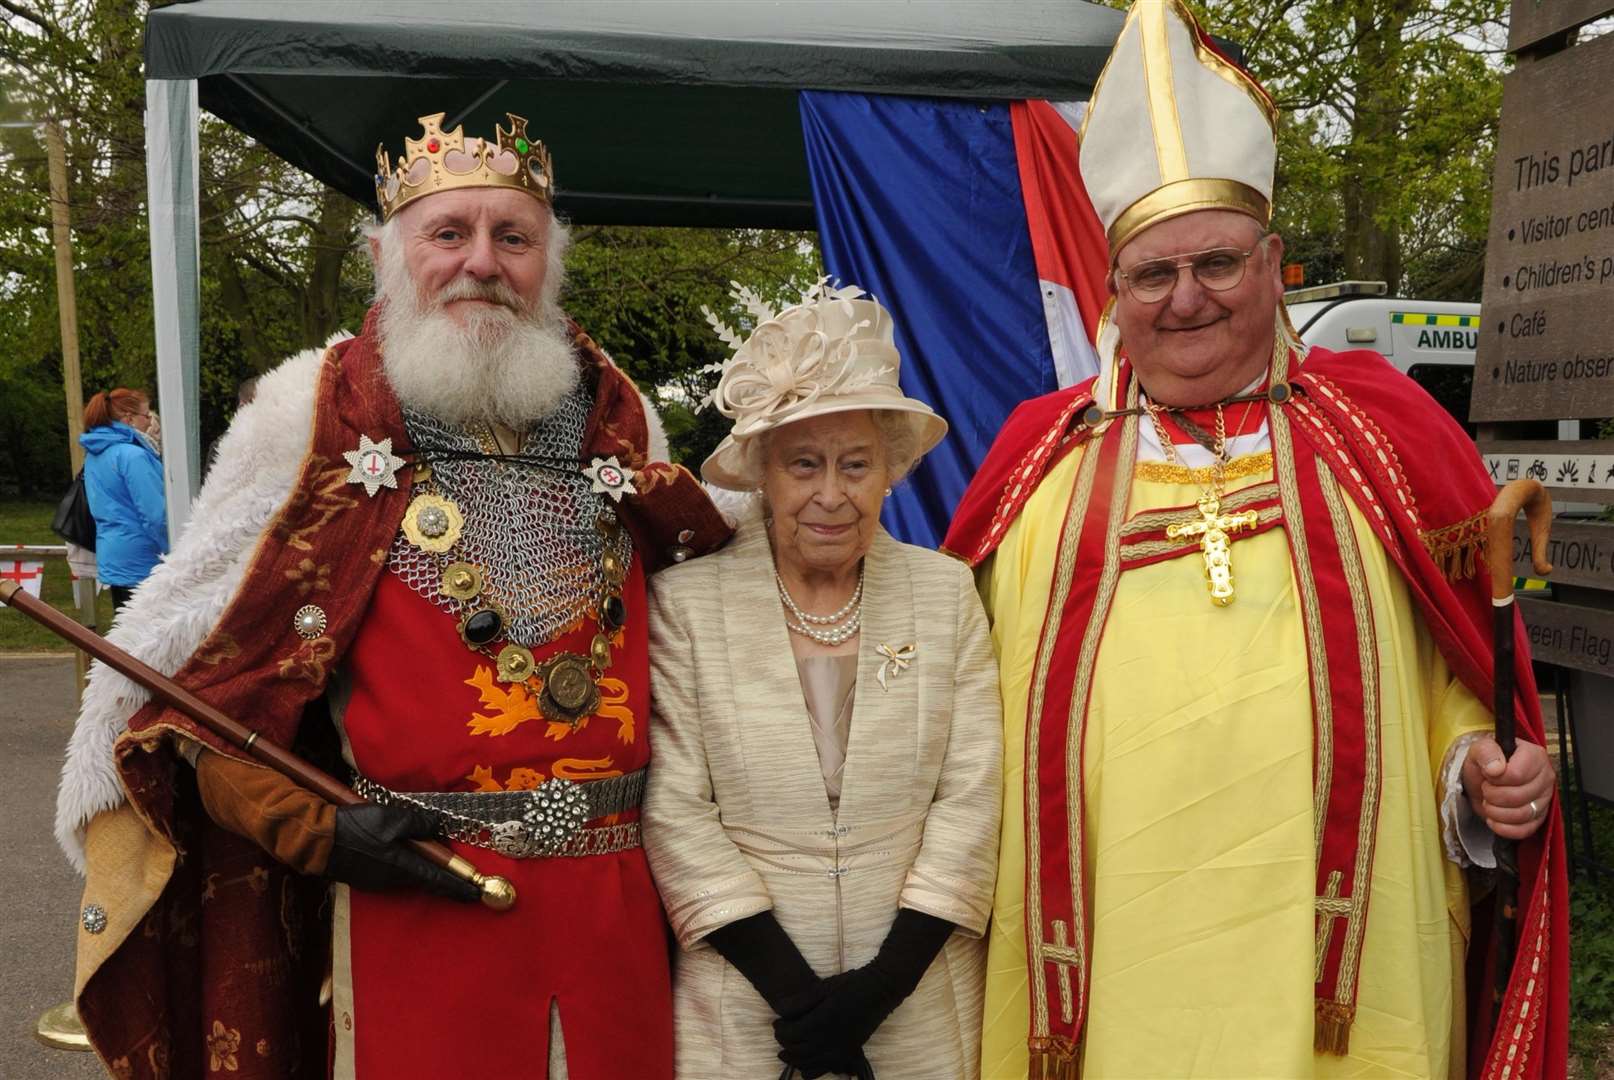 The Queen with friends at the English Festival in 2017